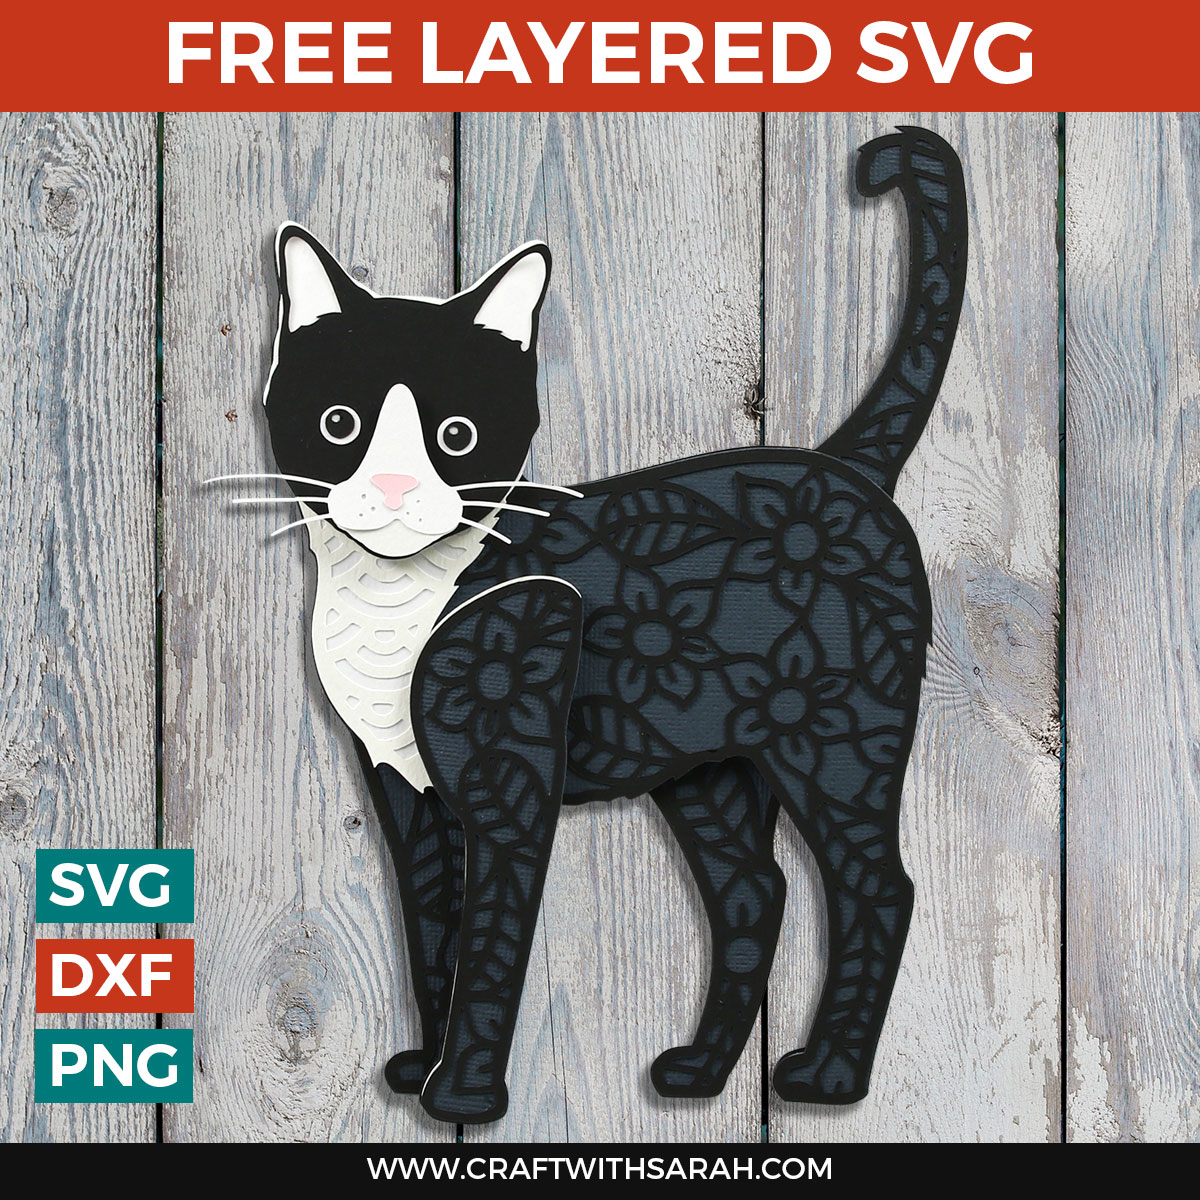 Free Cat Layered SVG | Make a Papercraft of your Cat!